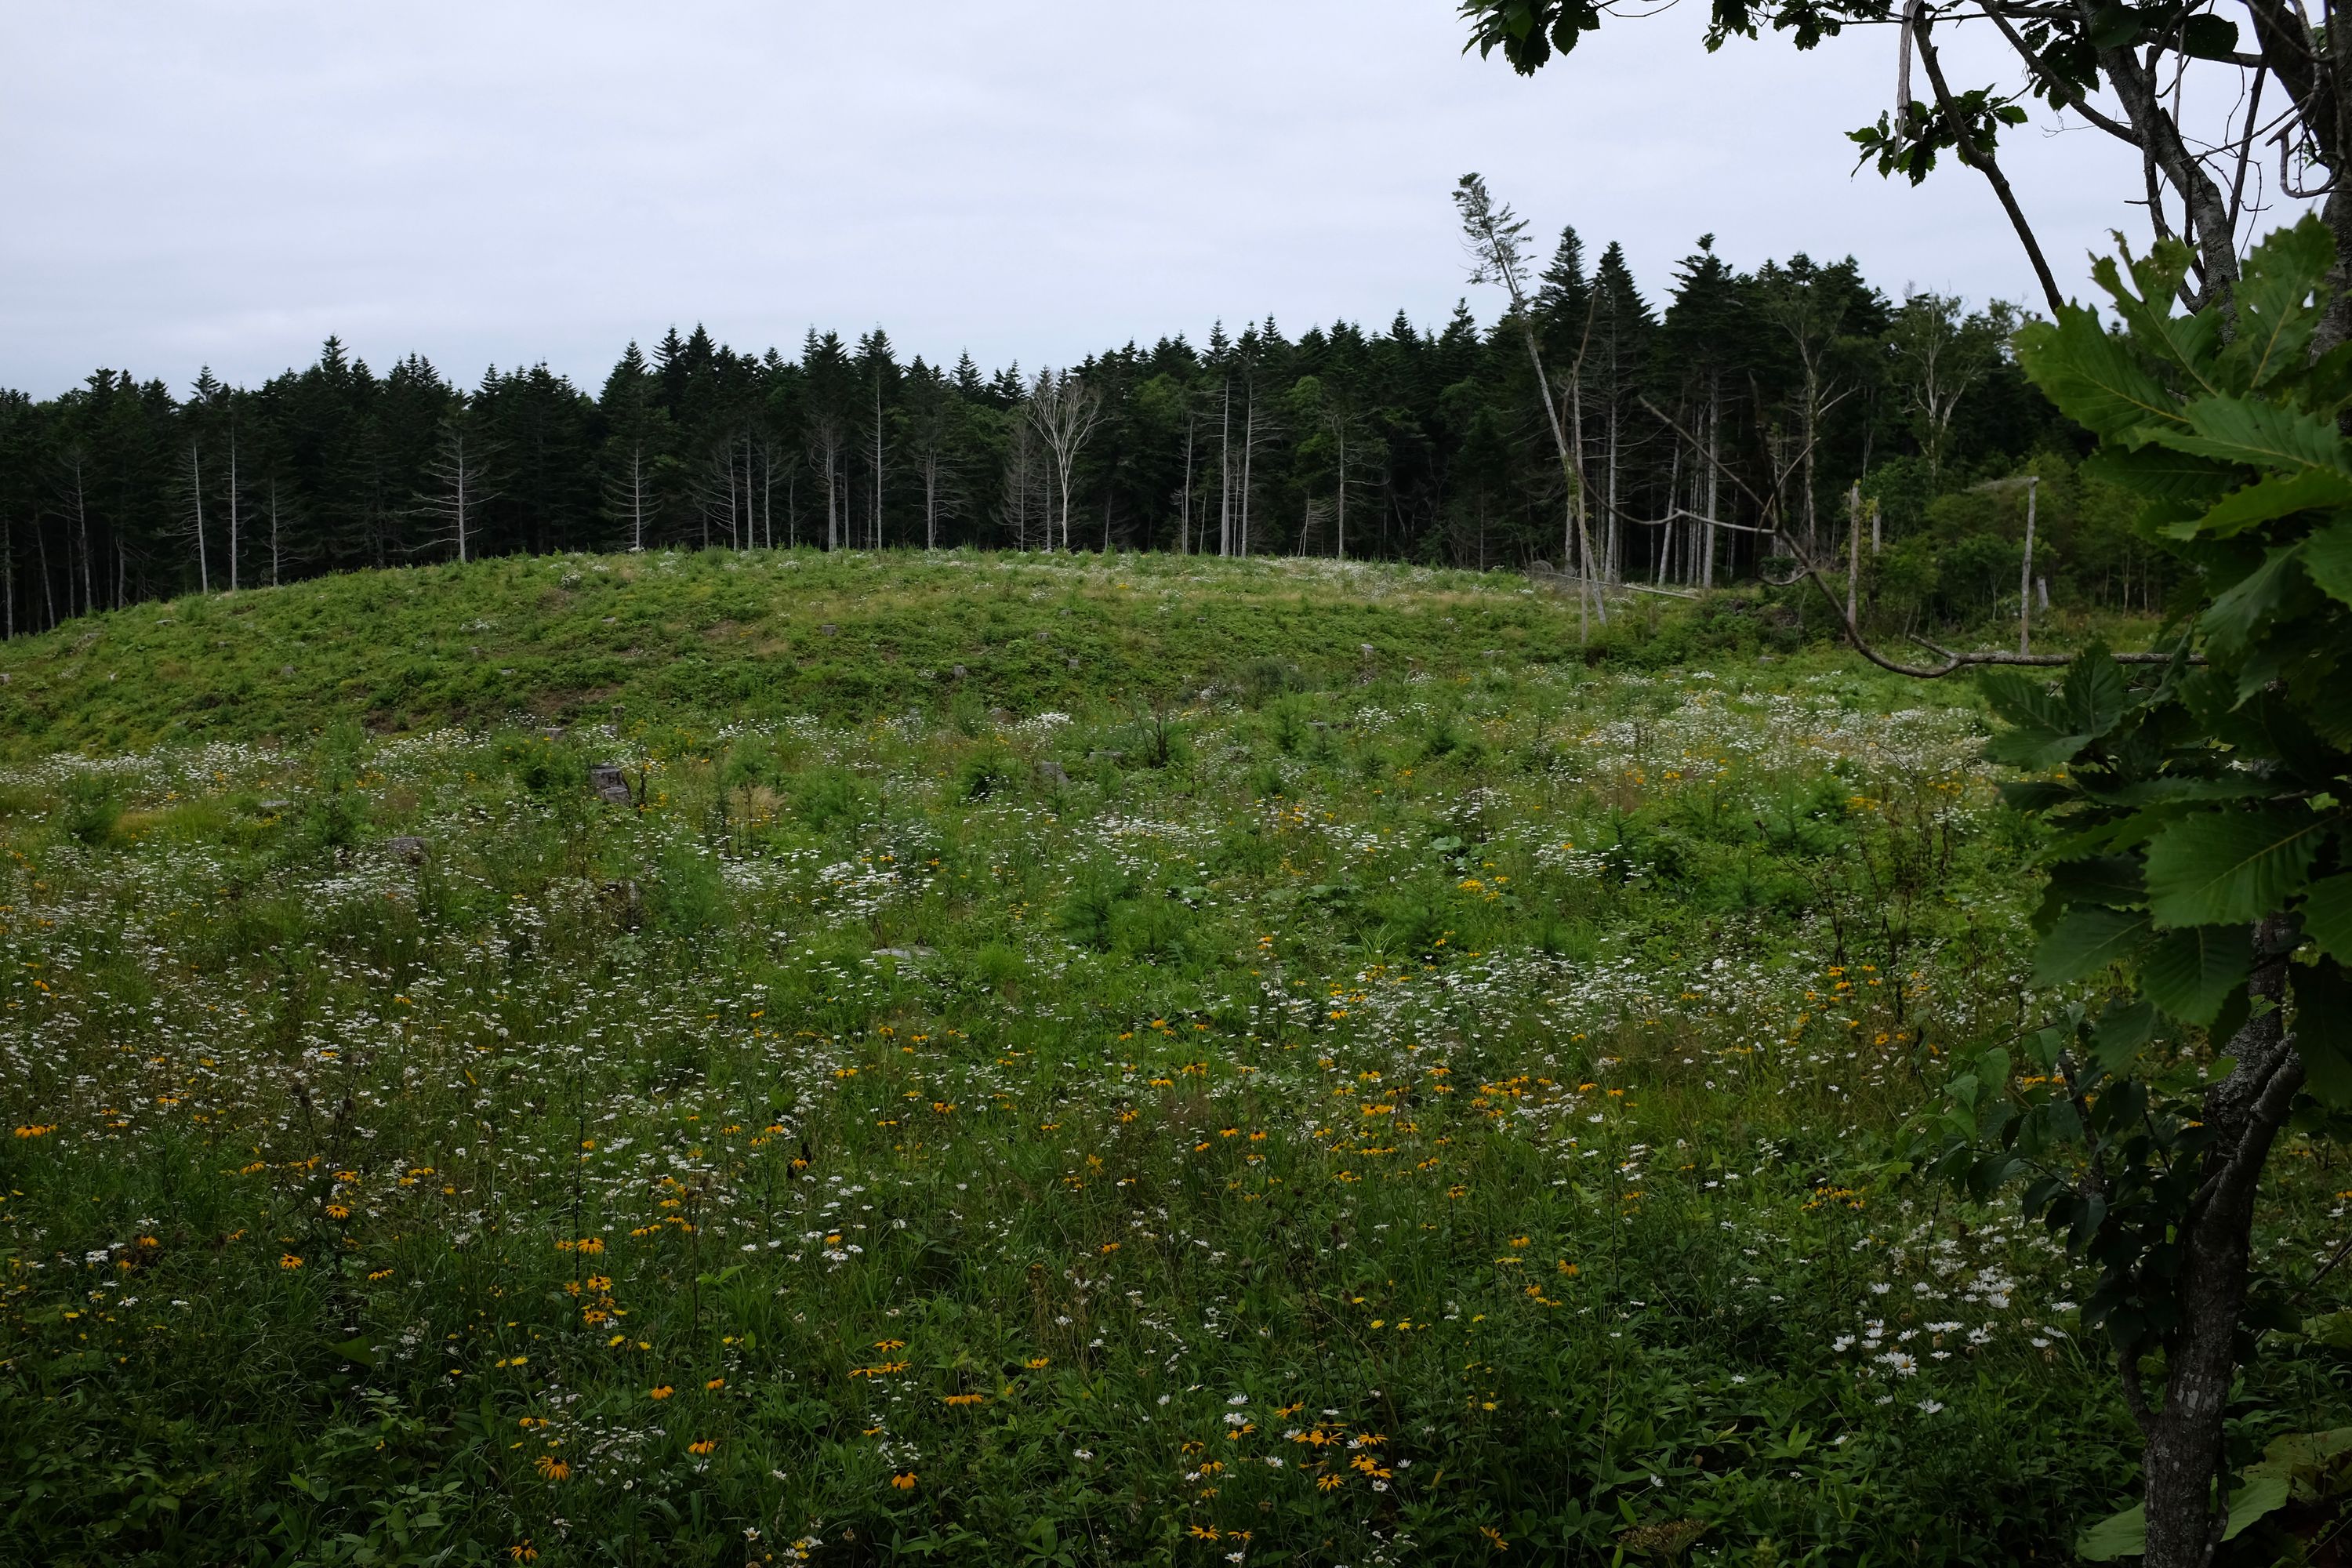 A summer meadow of wildflowers in front of a pine forest.